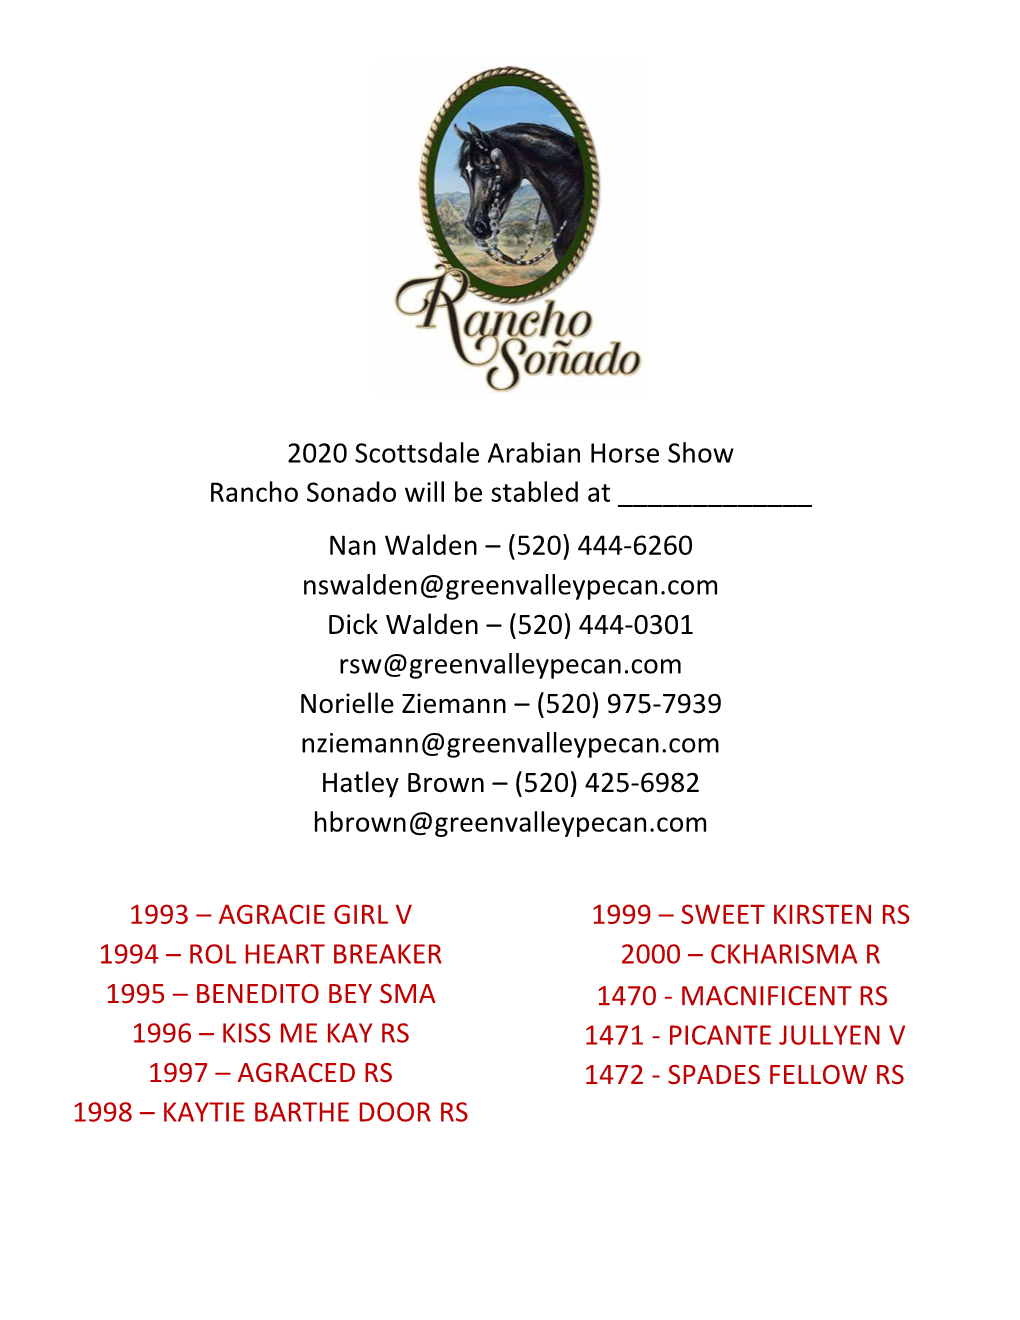 2020 Scottsdale Arabian Horse Show Rancho Sonado Will Be Stabled At